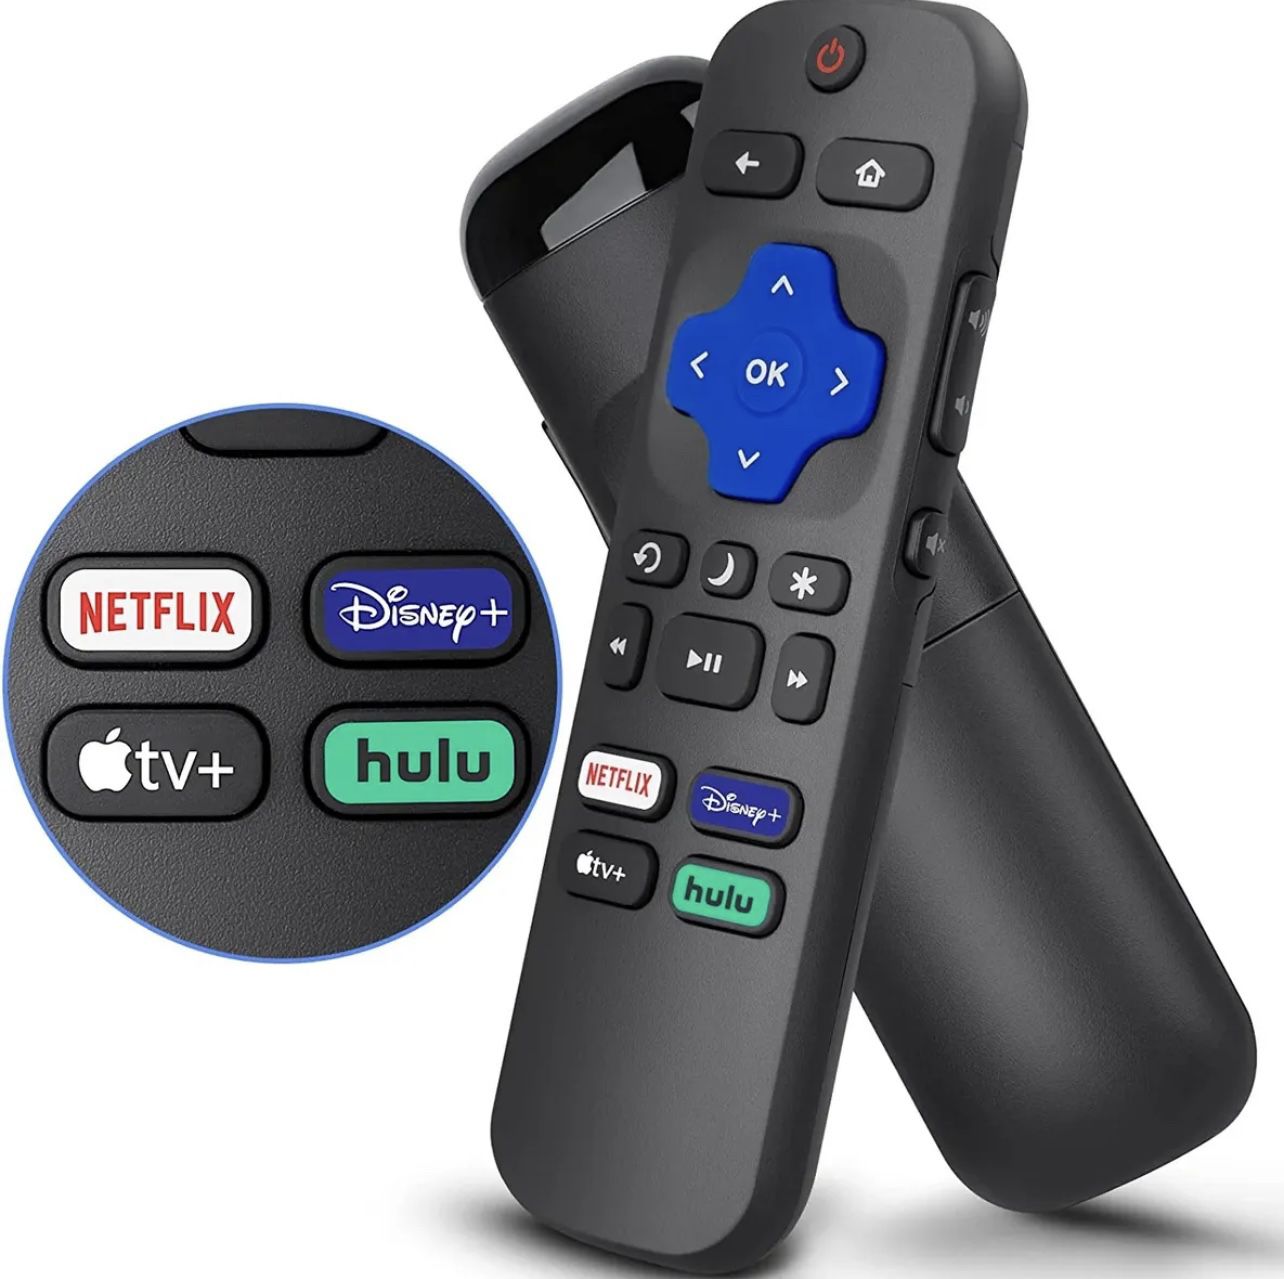 Replacement ROKU remote control w/ FREE 🧪glow in the dark case for TCL |Hisense |ONN TV’s & More